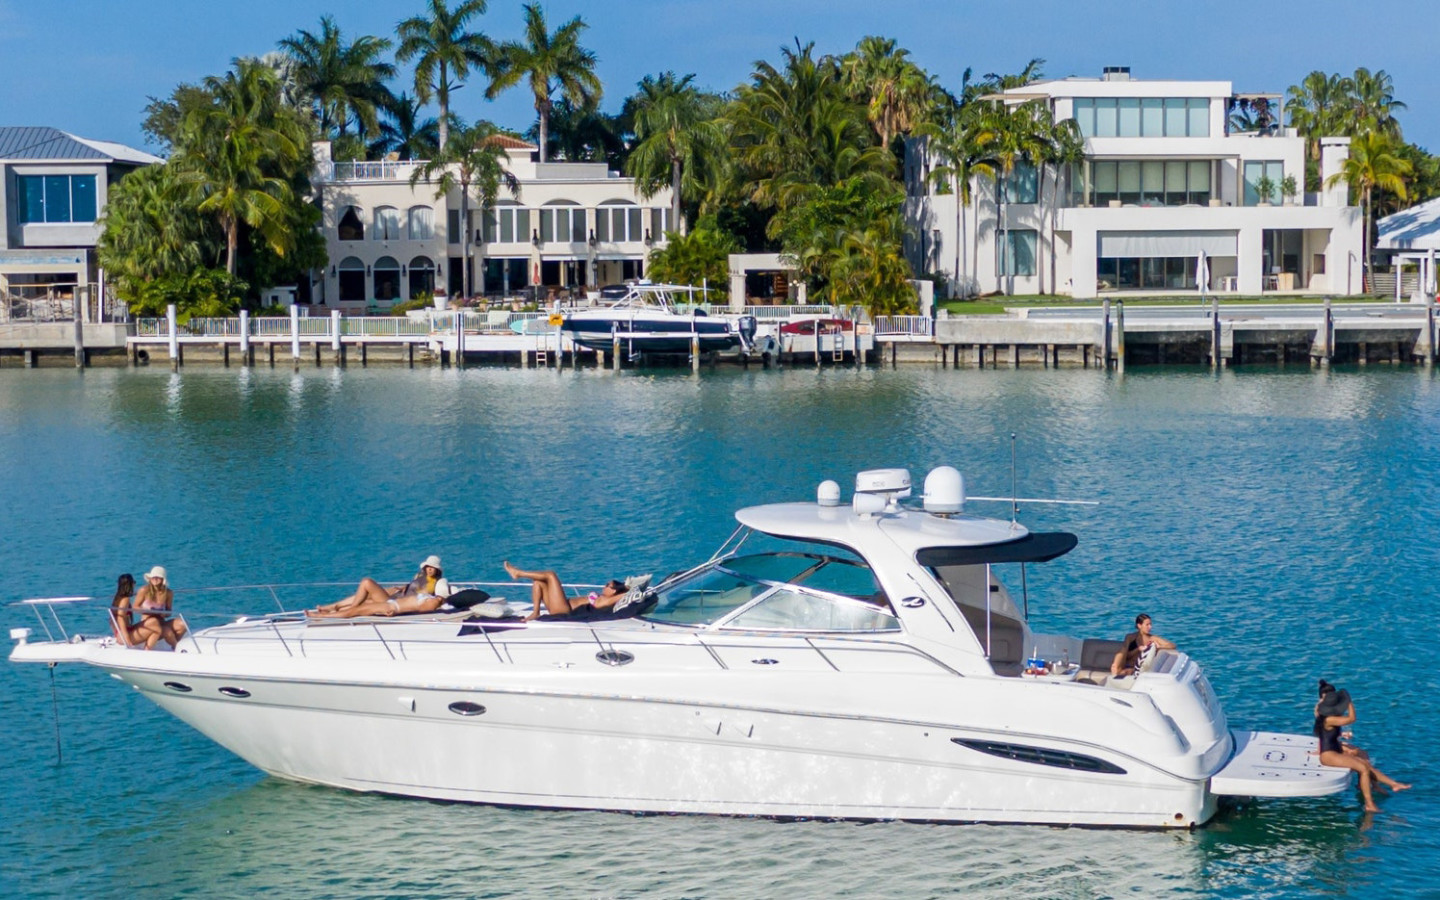 The Best Boat Rentals for a Bachelorette Party - GetMyBoat